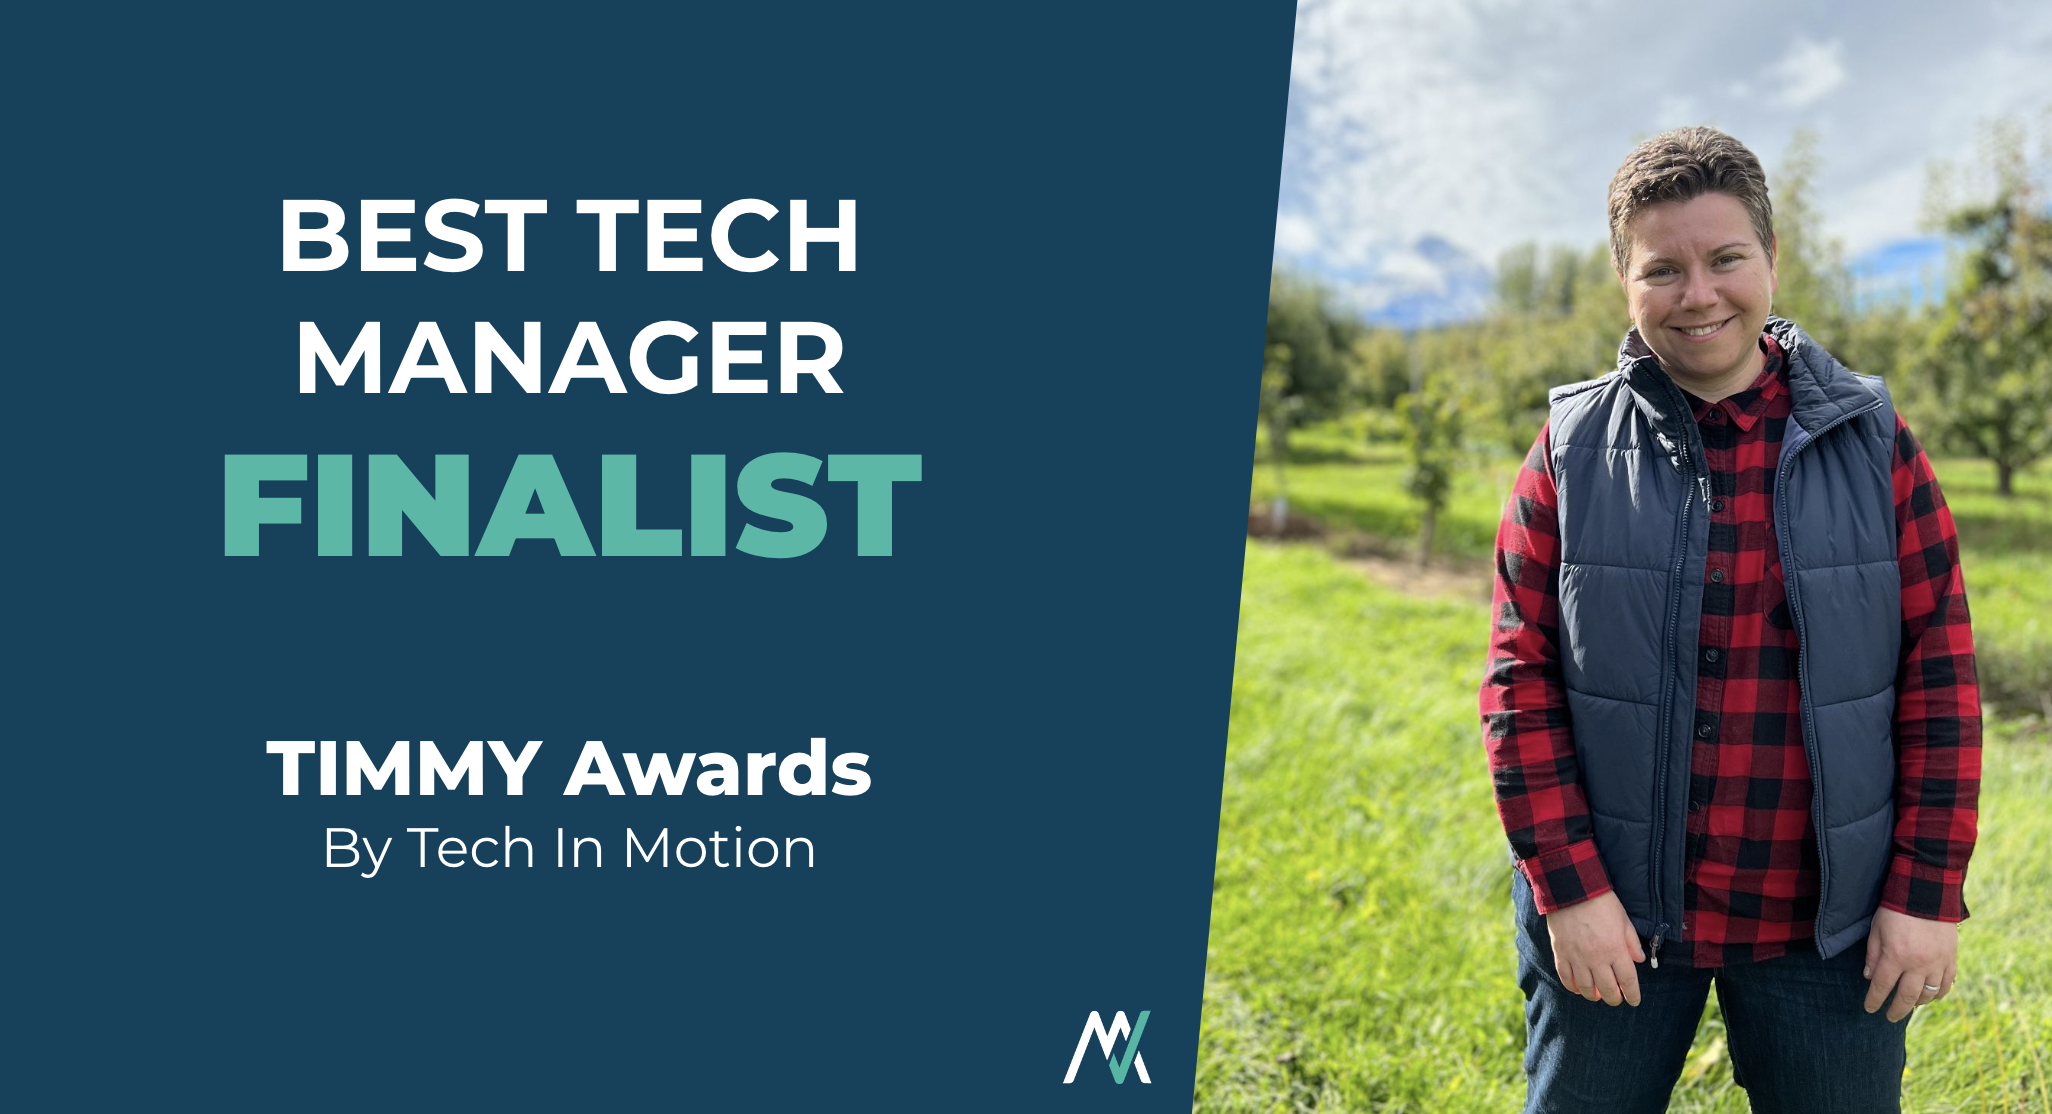 MyVest Named Finalist in Two TIMMY Awards: Best Tech Manager and Best Tech Work Culture